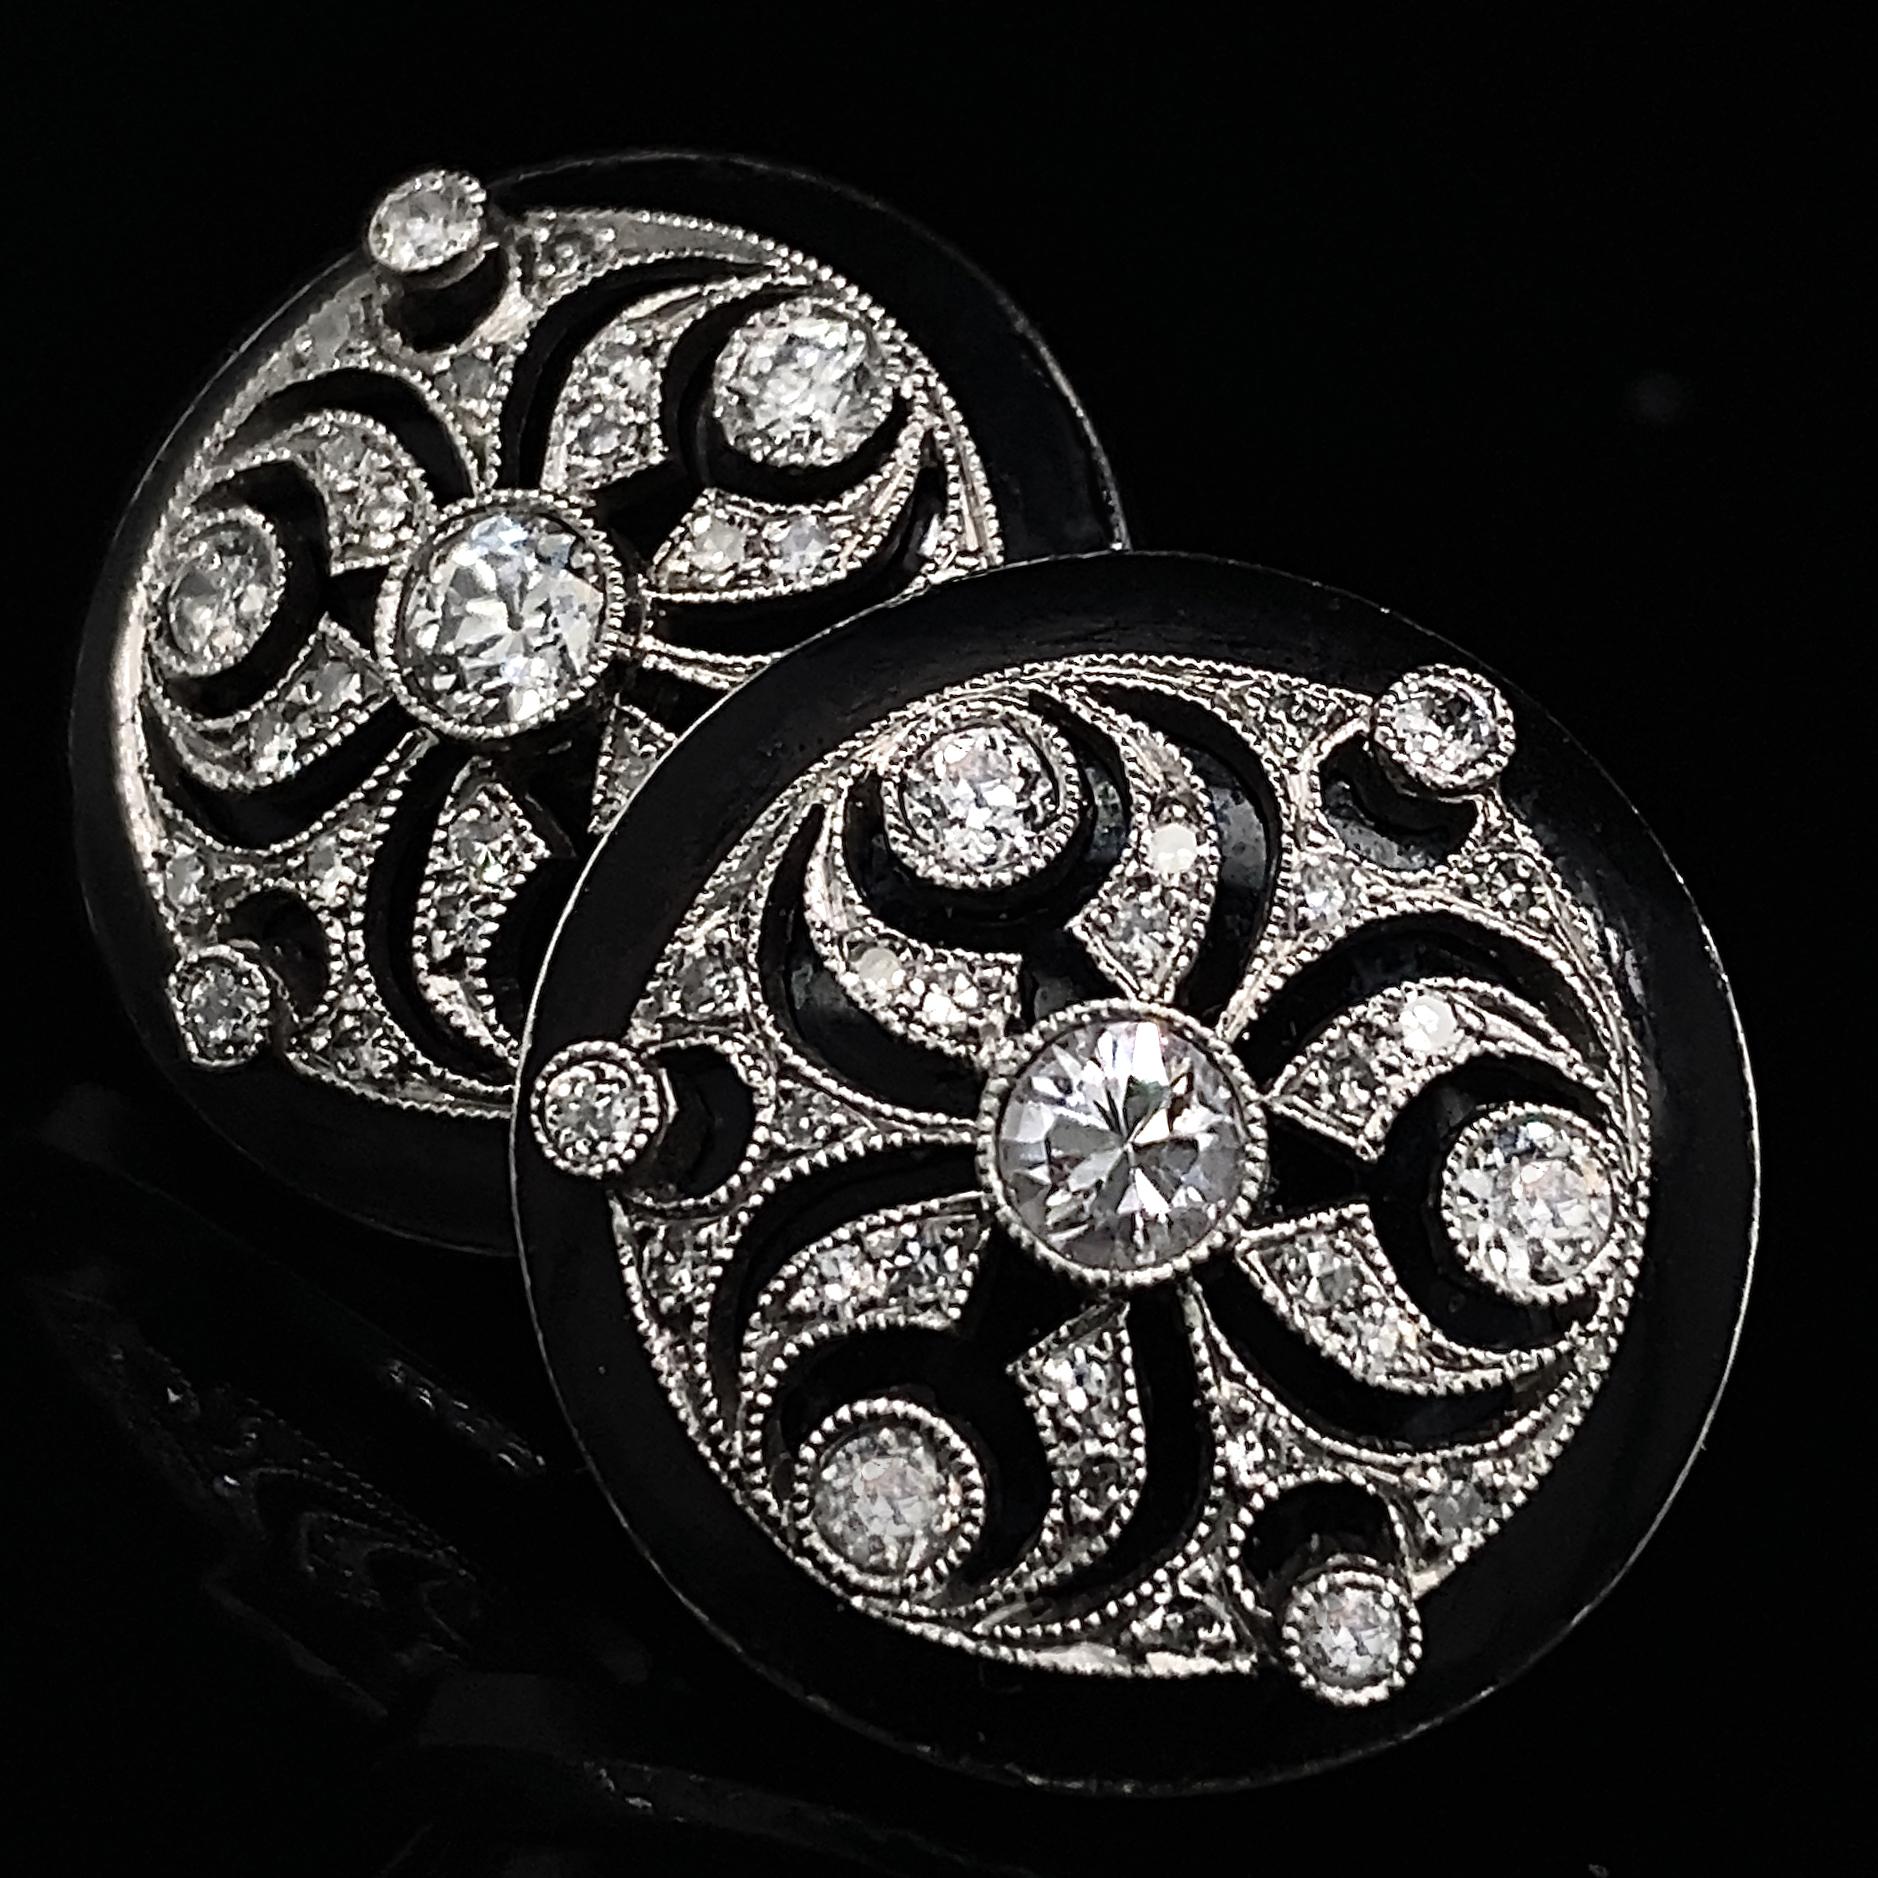 These evocative earrings are skillful reproductions of late Victorian ear drops that would have hung from wires, hooked at the back.  This updated version attaches directly to the ear with posts.  

Platinum rounds with a cutout trefoil design are